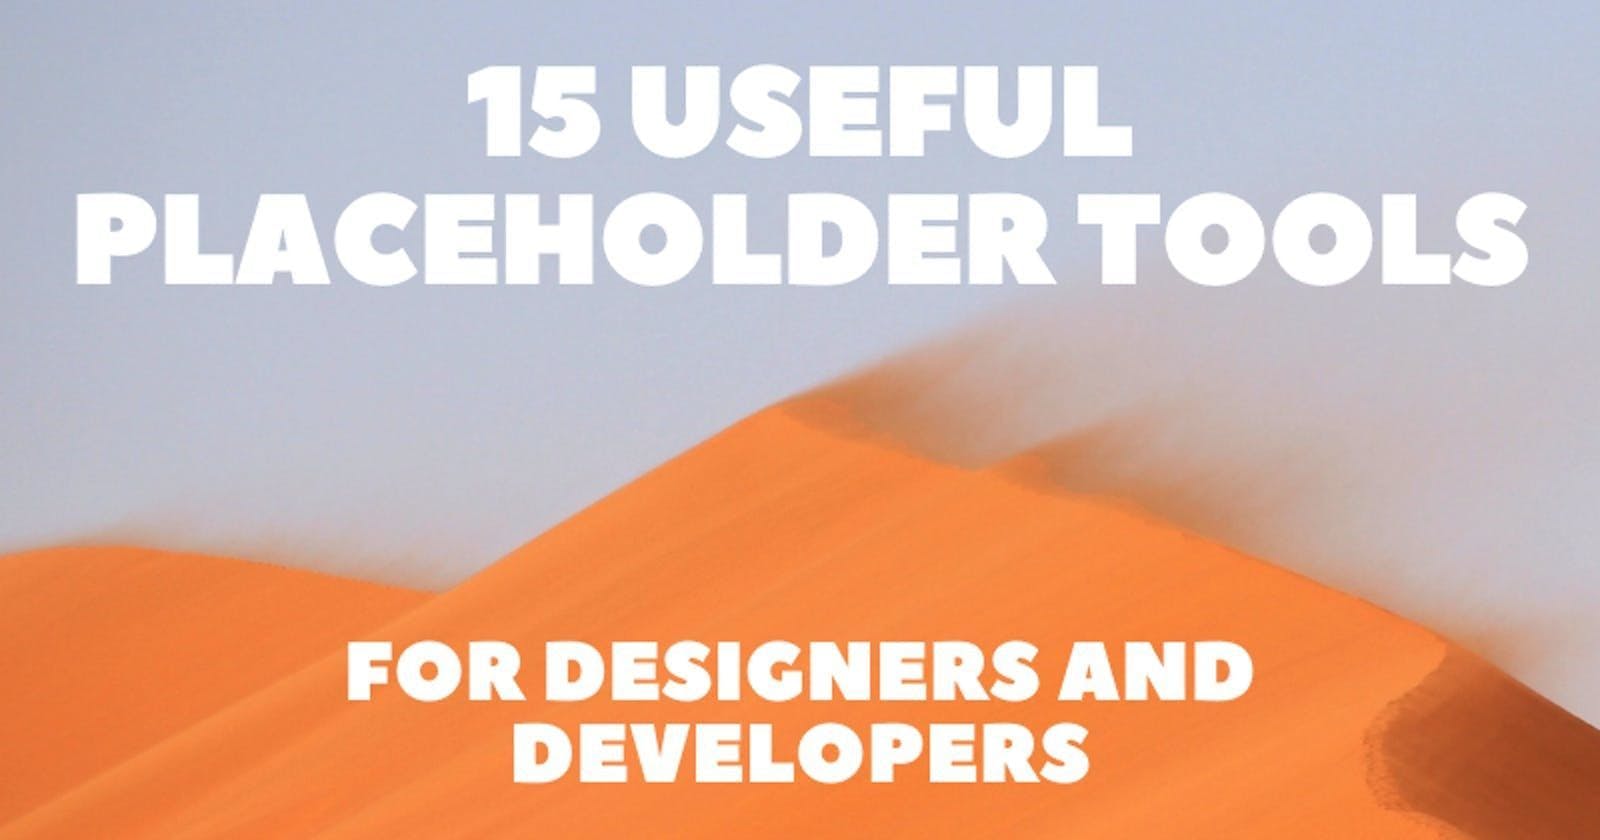 /the-placeholder-tools-that-boost-productivity-for-developers-and-designers feature image